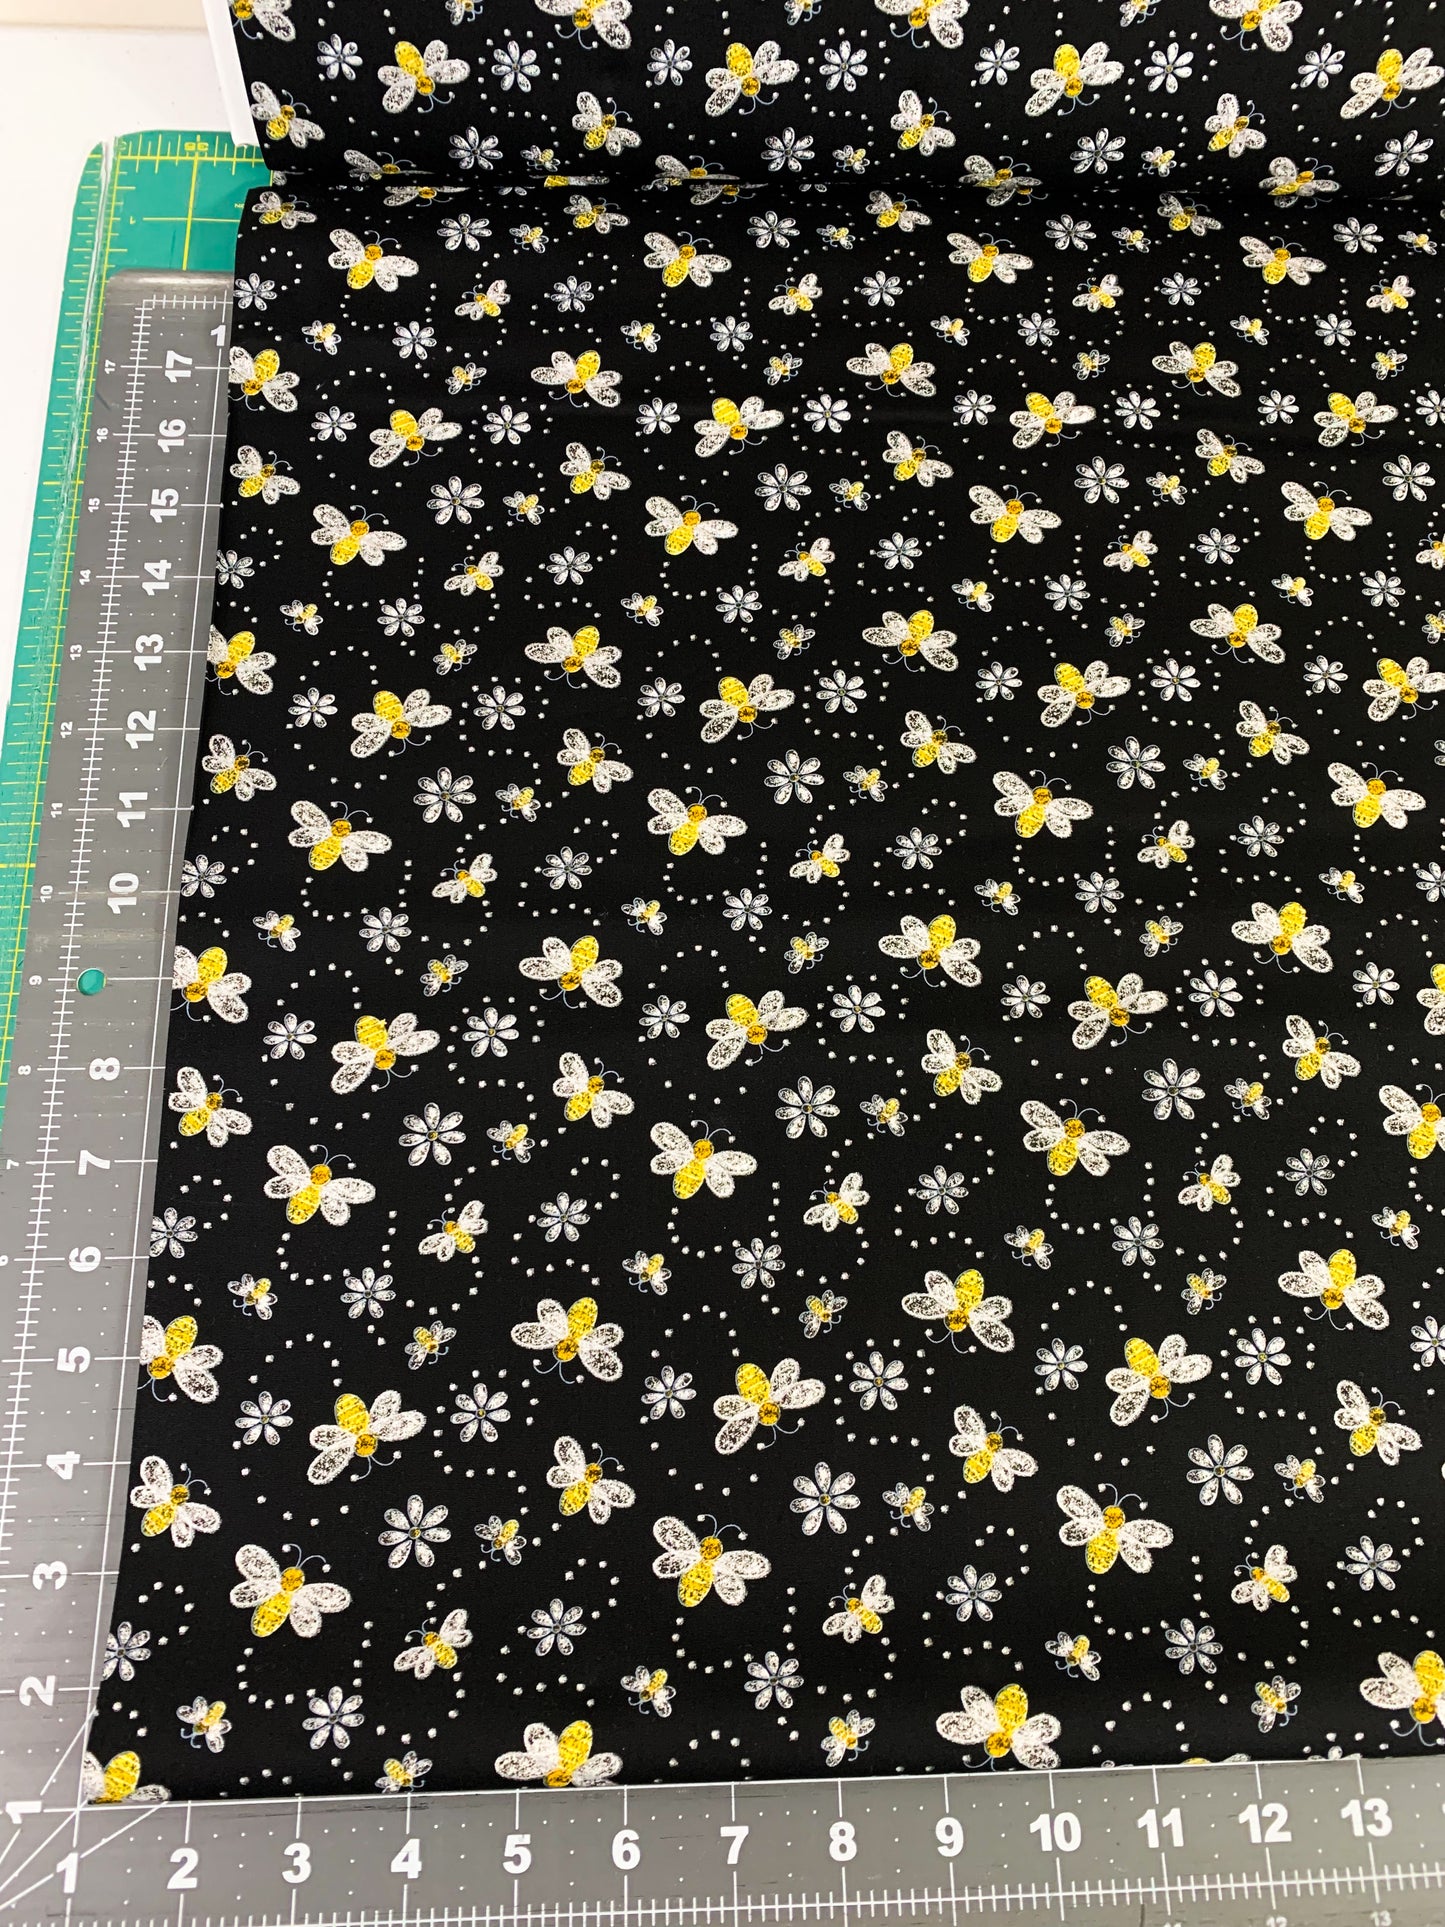 Glitter bee fabric 15540 Bees and white flowers